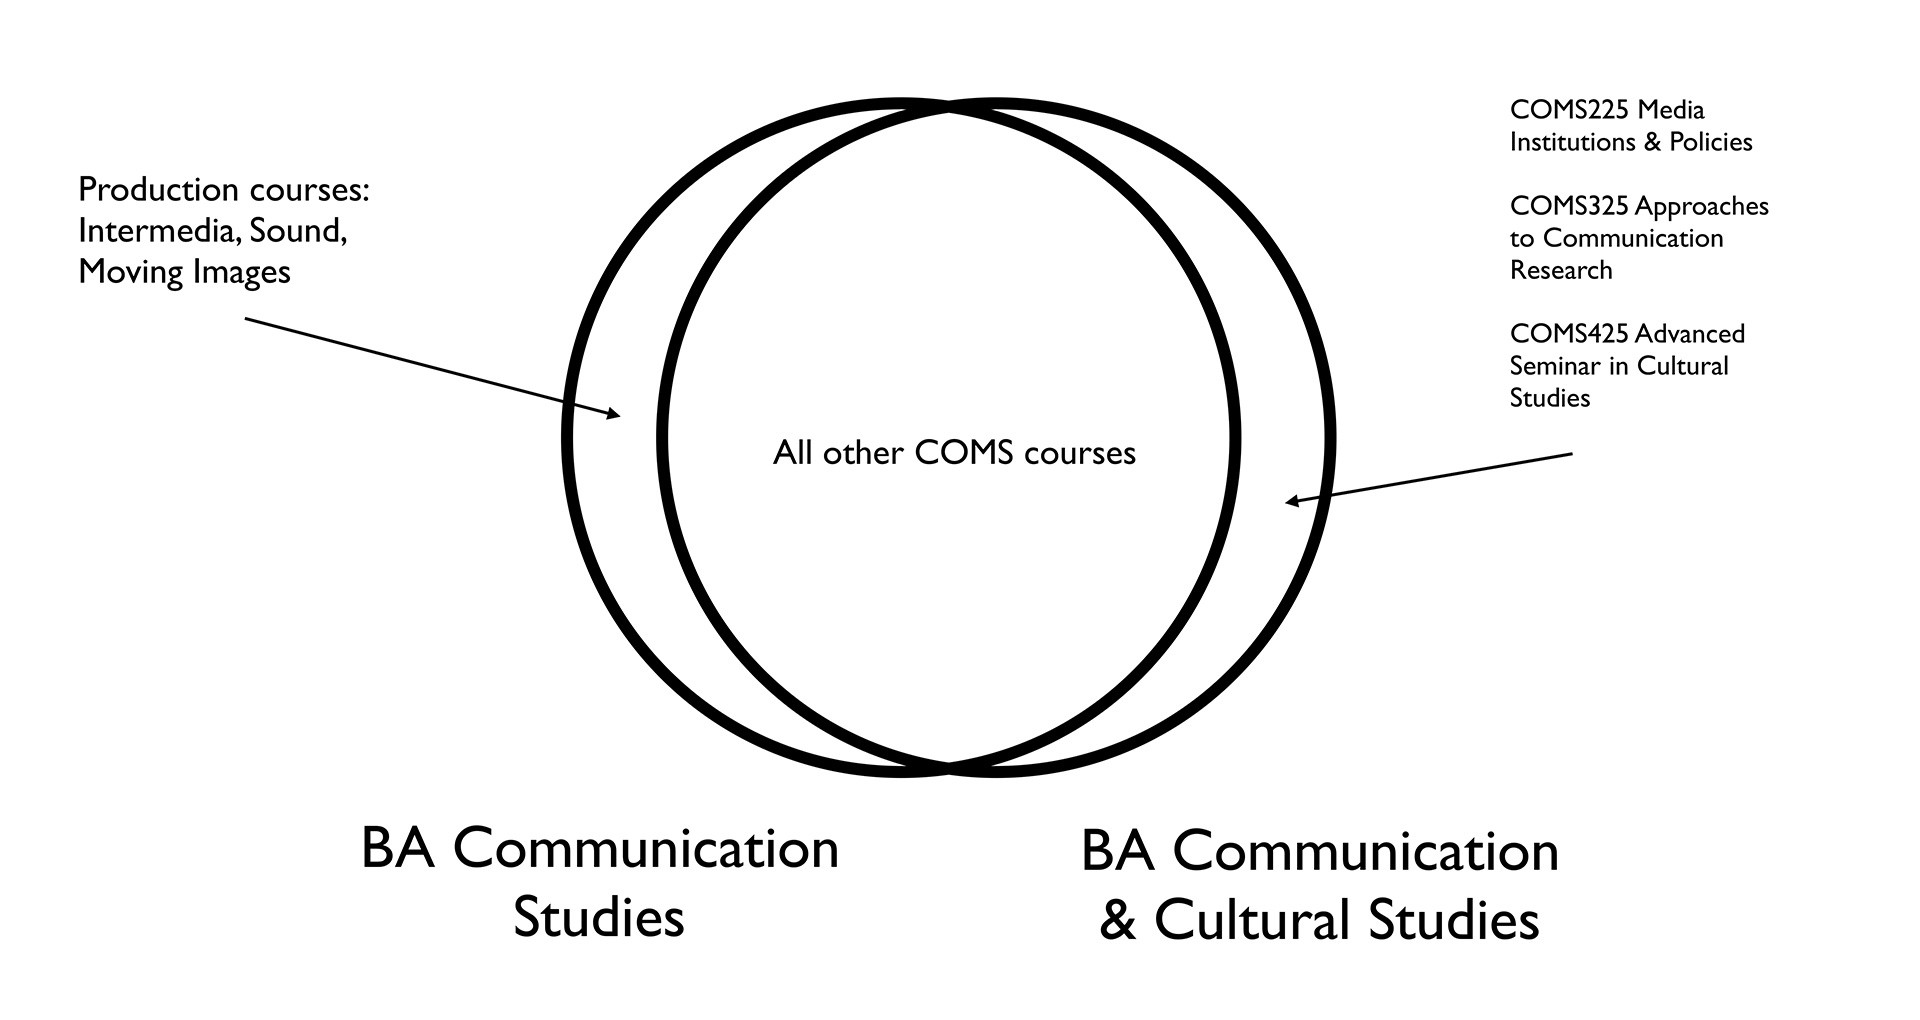 Venn diagram detailing the differences between the Communication Studies and the Communication & Cultural Studies programs. The left circle shows production courses in Intermedia, sound and moving images as part of Communication Studies. The right circle lists core courses COMS 225, COMS325 and COMS 425 as part of Communication & Cultural Studies. All other COMS courses are listed in the overlapping area of the two circles.